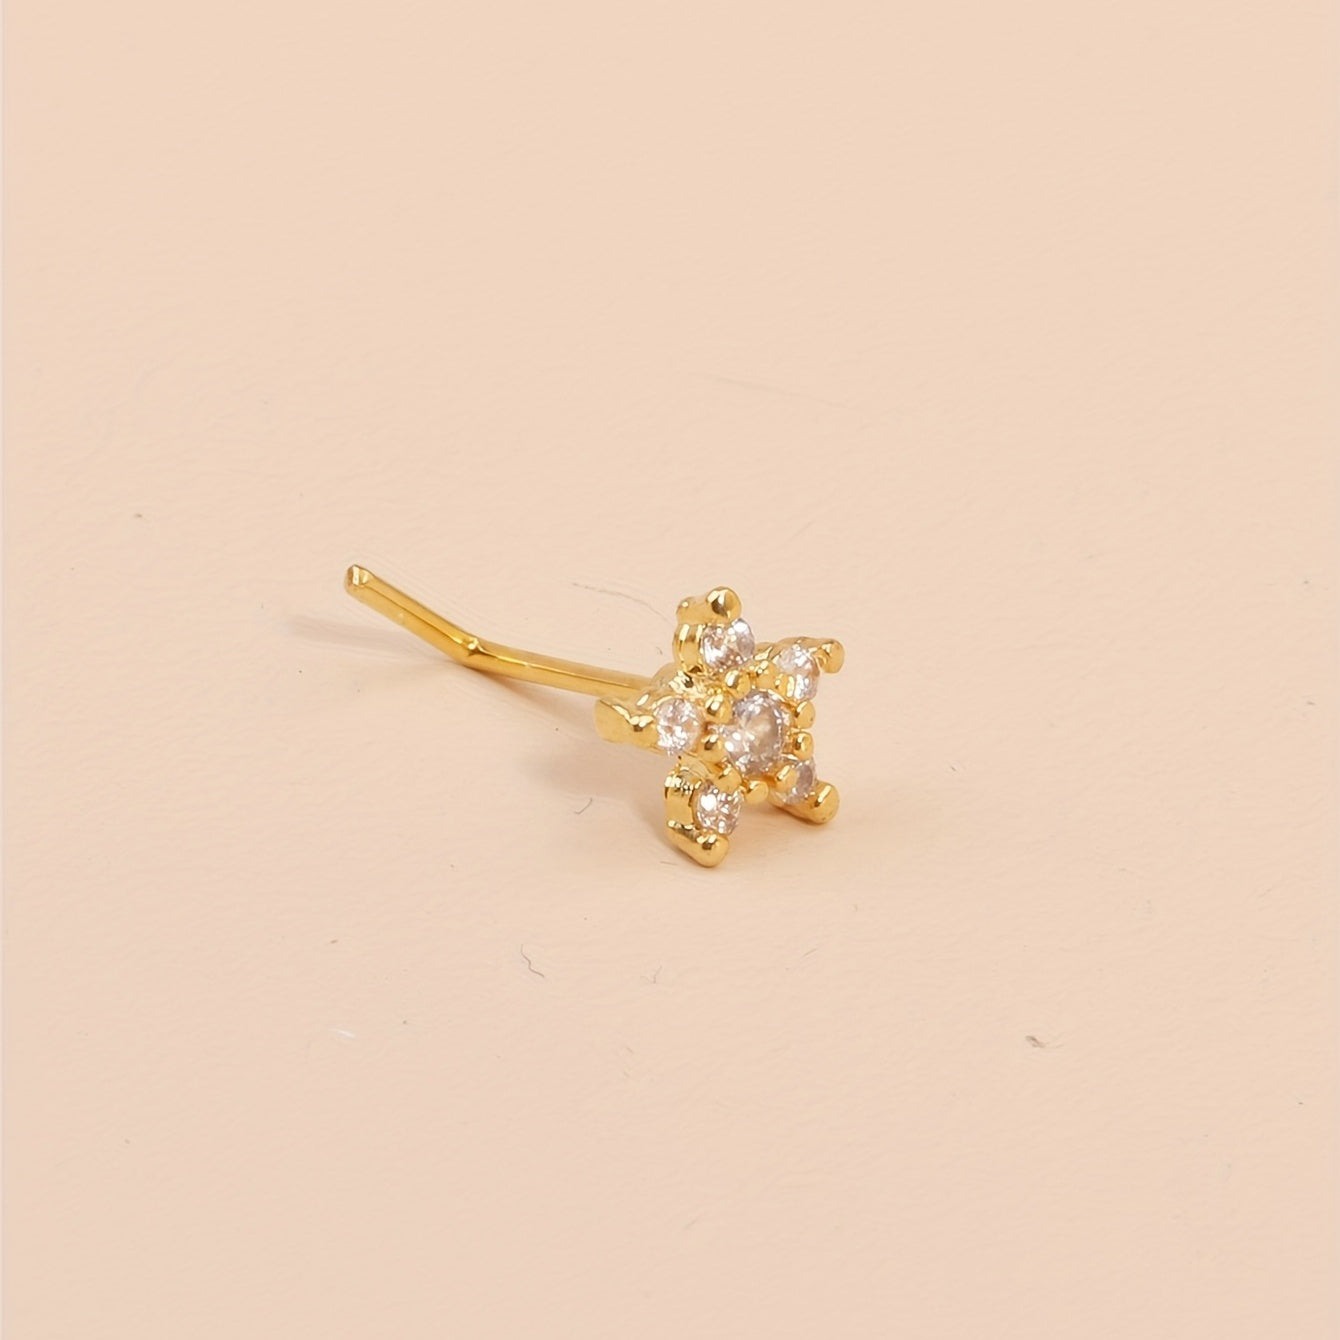 Nose Ring Stud L Shape Cubic Zirconia Flower Shape Nose Piercing Jewelry Golden Silvery